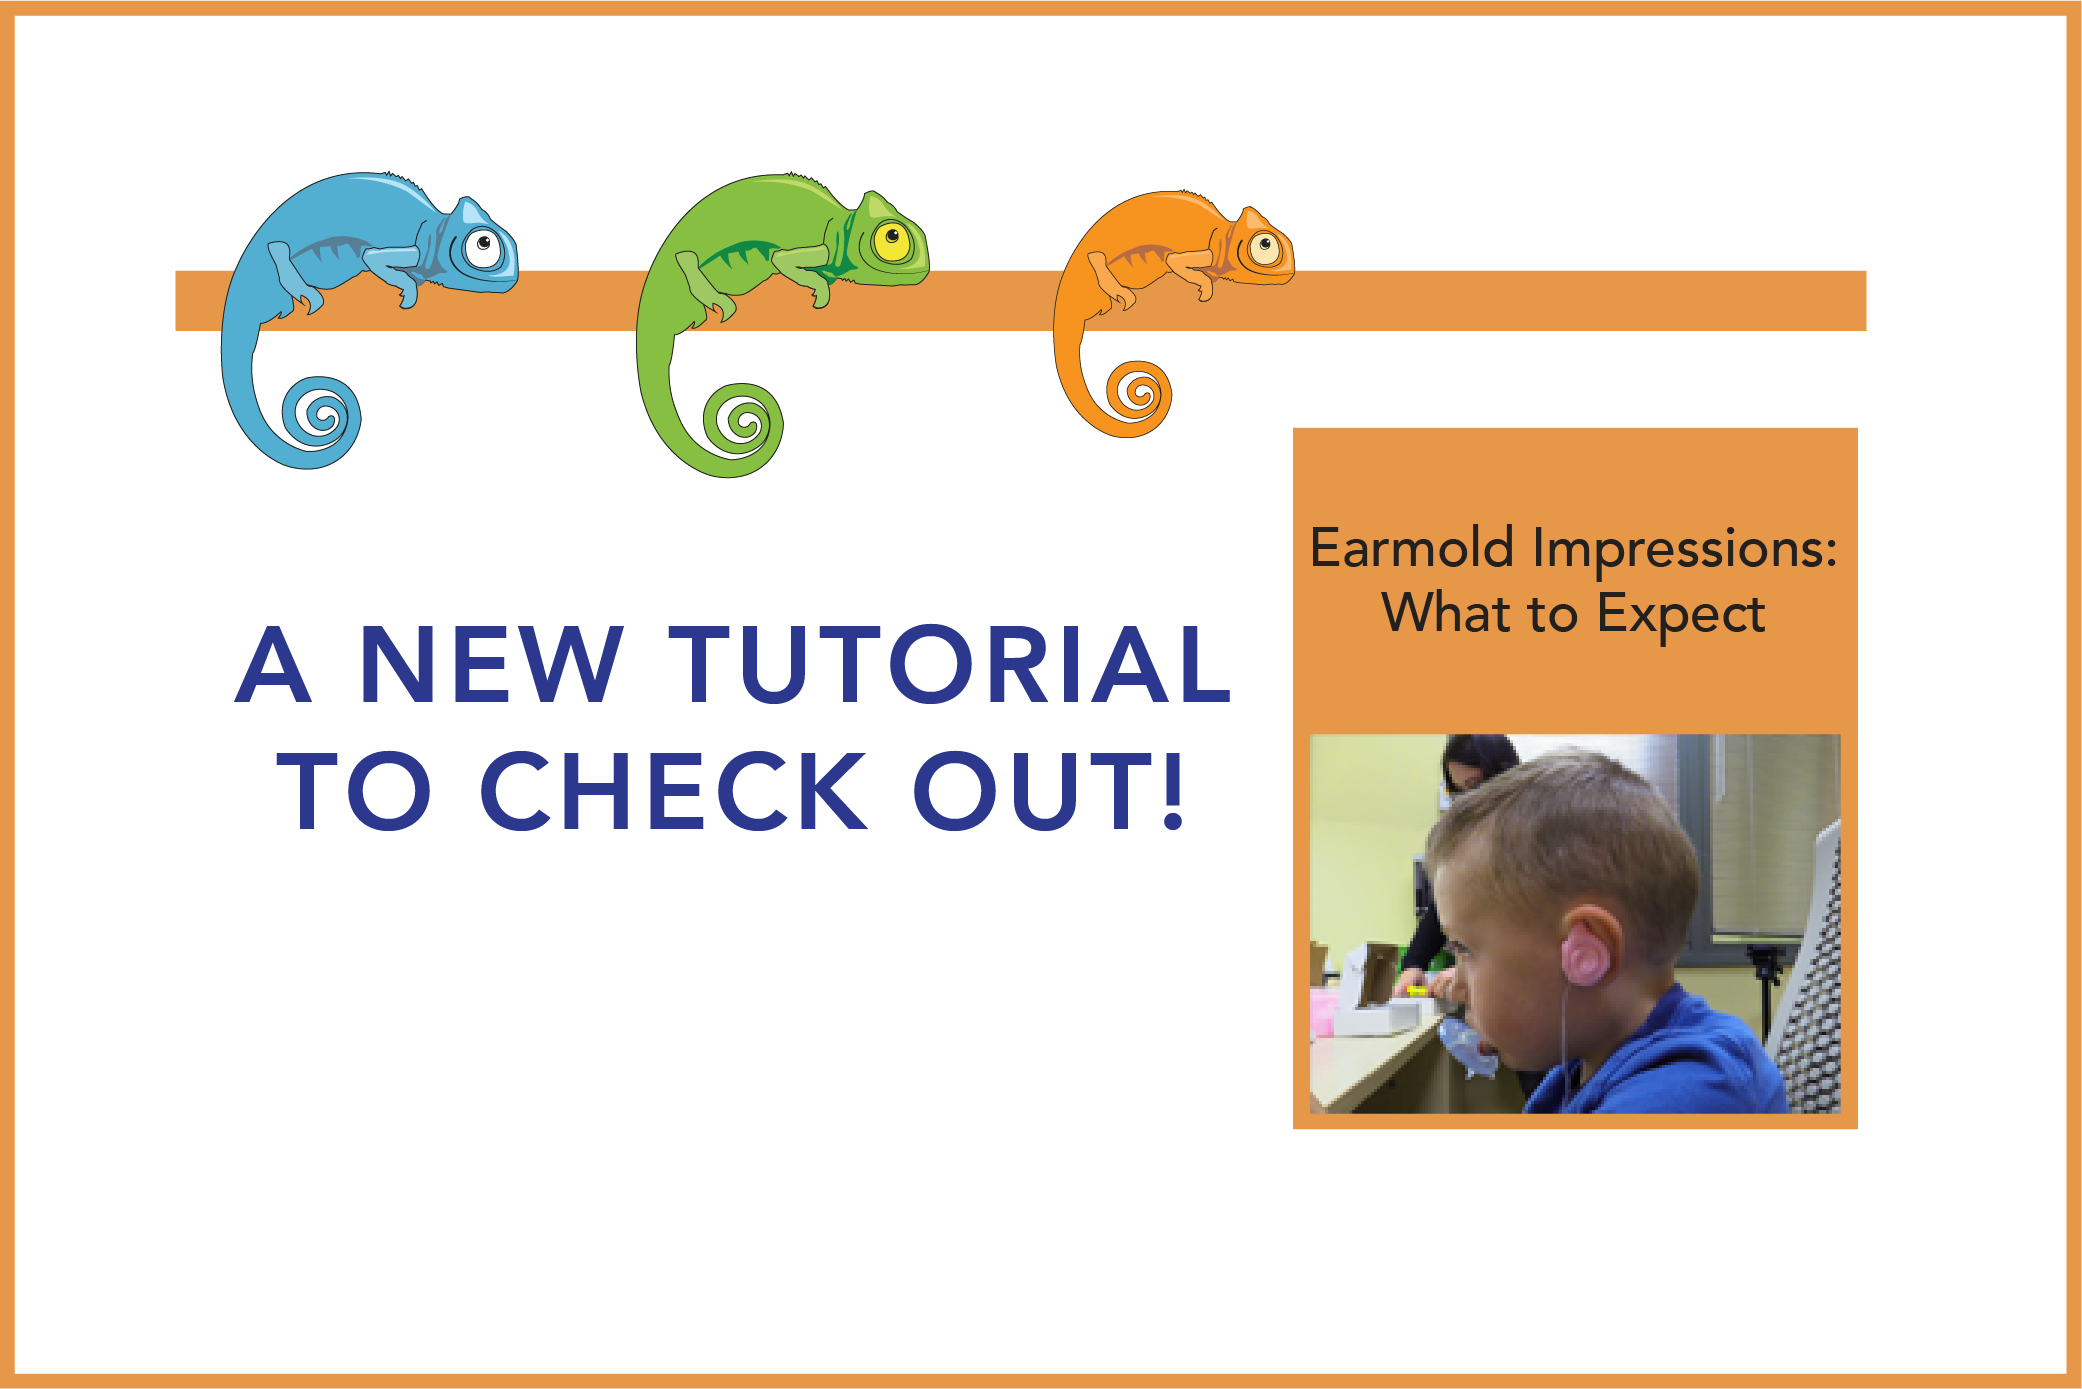 A New Tutorial to Check Out! Earmold Impressions: What to Expect